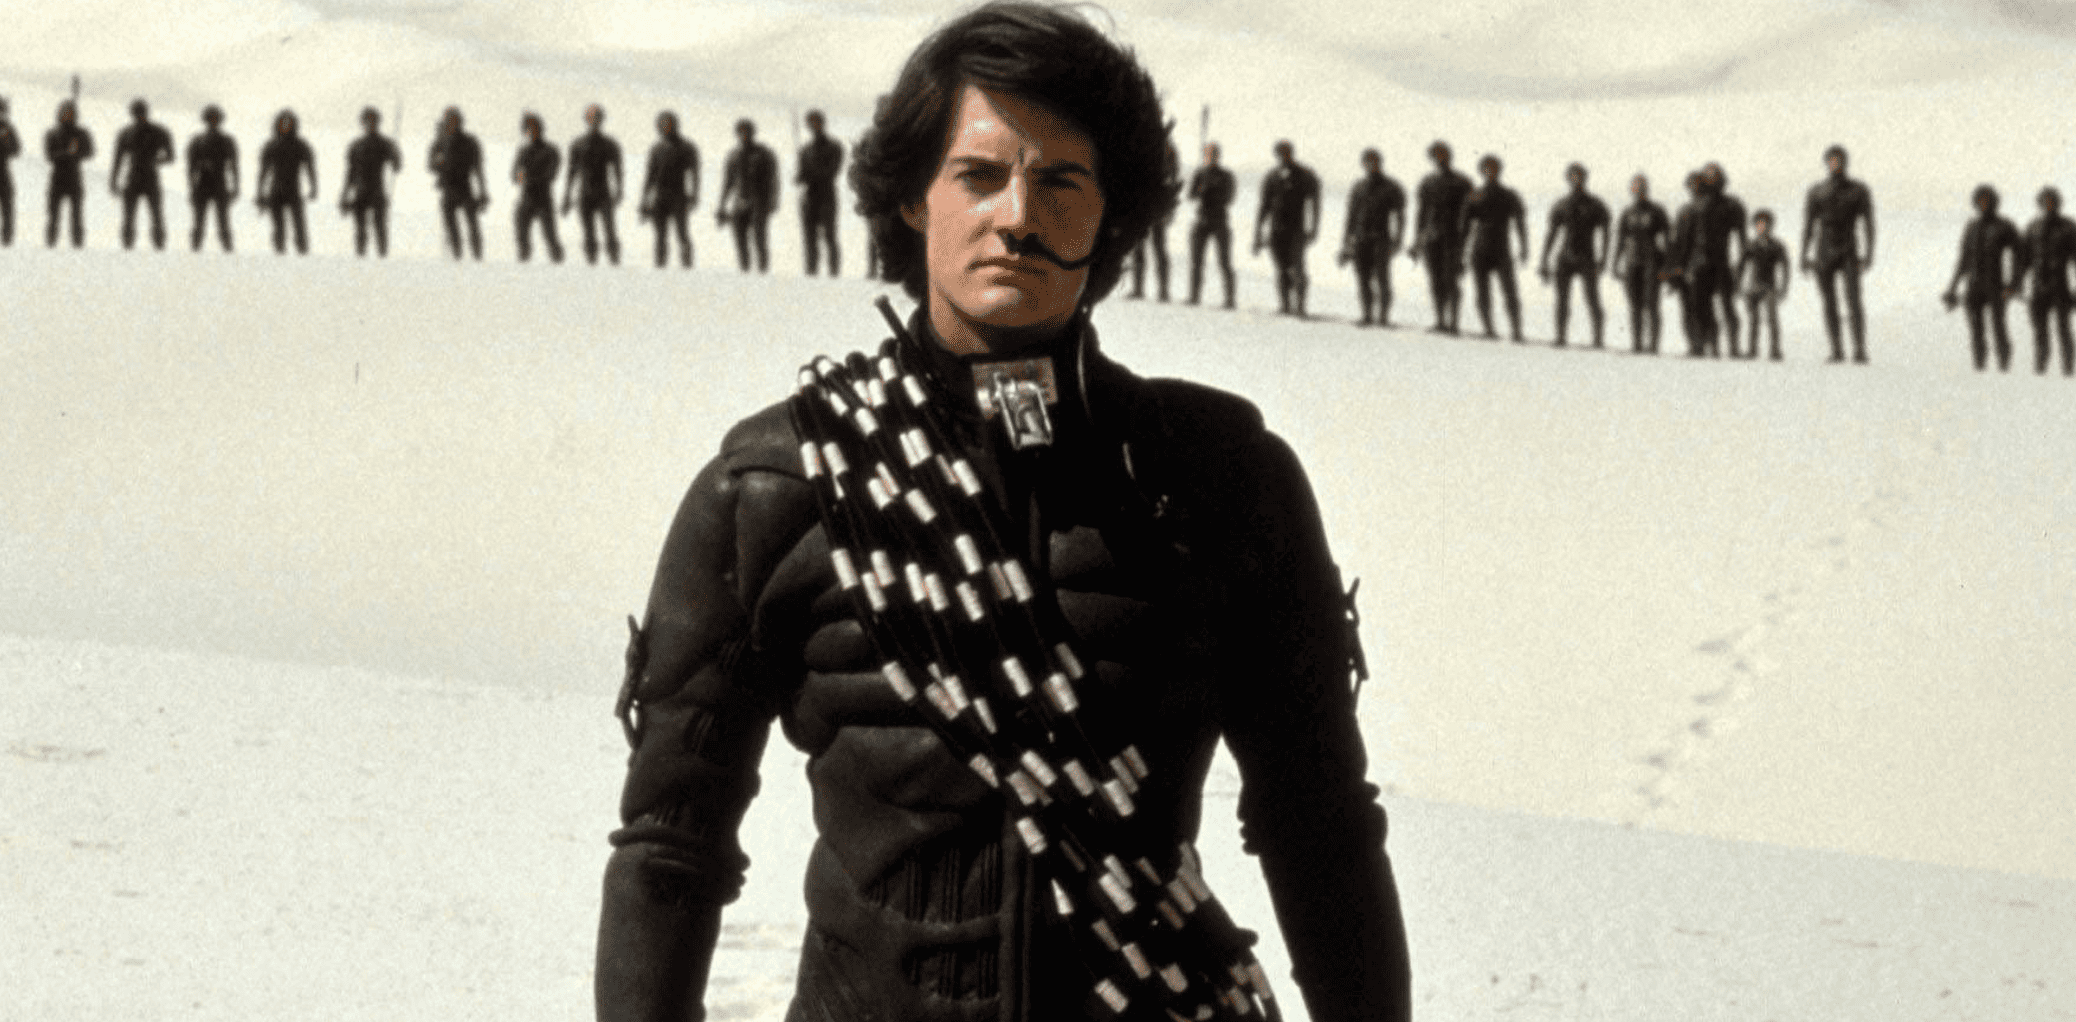 Paul Atreides stands in the desert while in uniform in this image from Dino De Laurentiis Company.